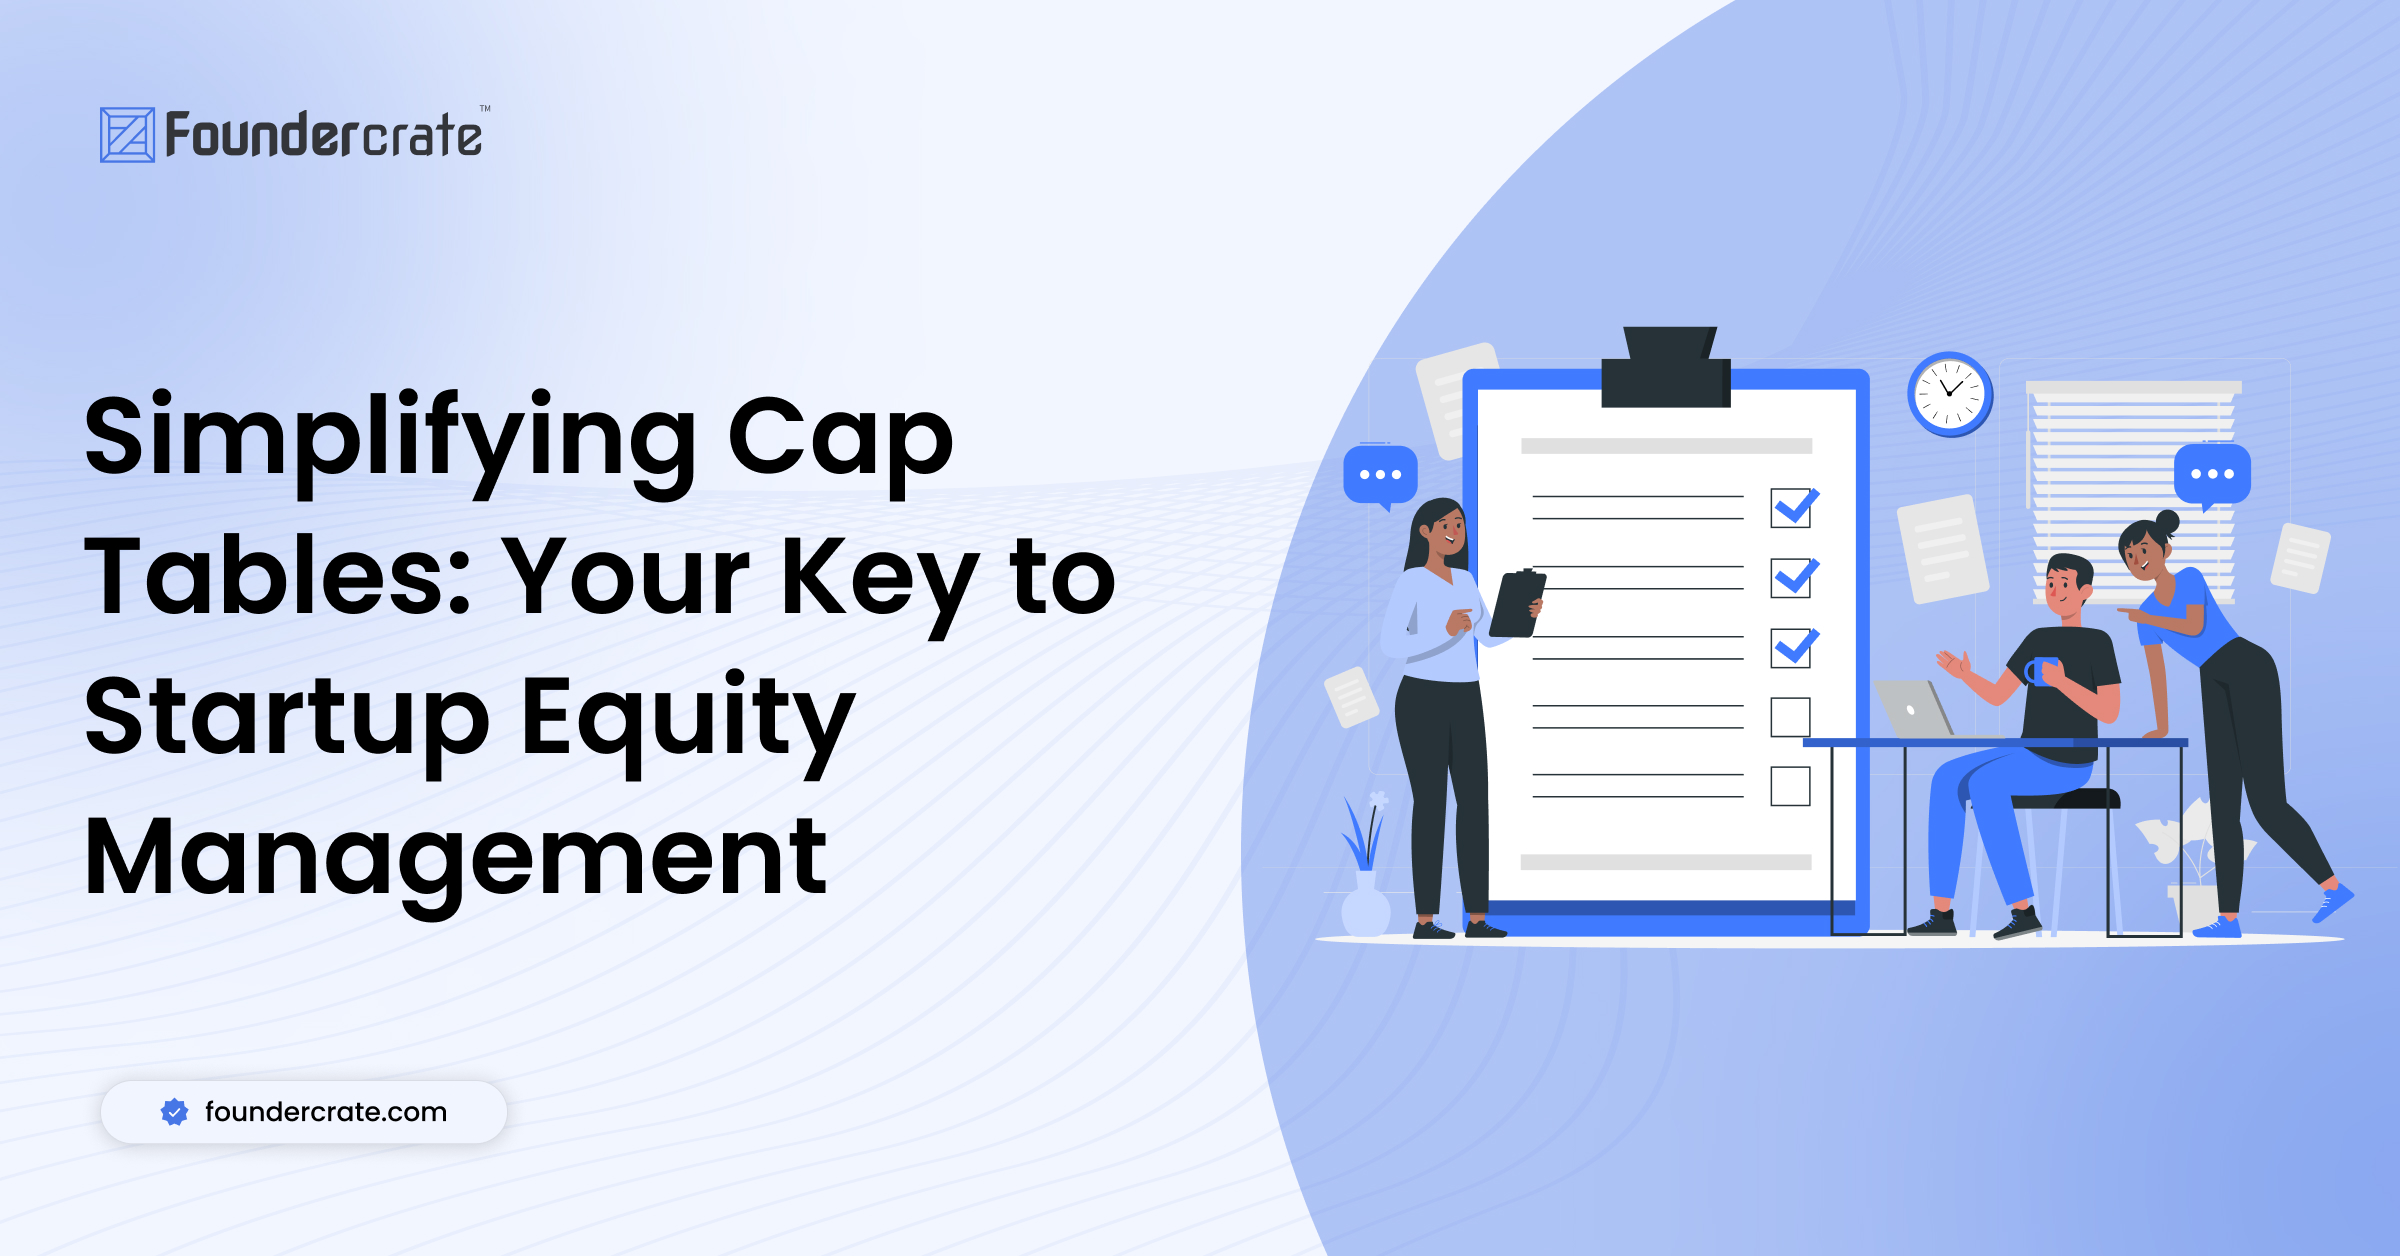 Simplifying Cap Tables: Your Key to Startup Equity Management